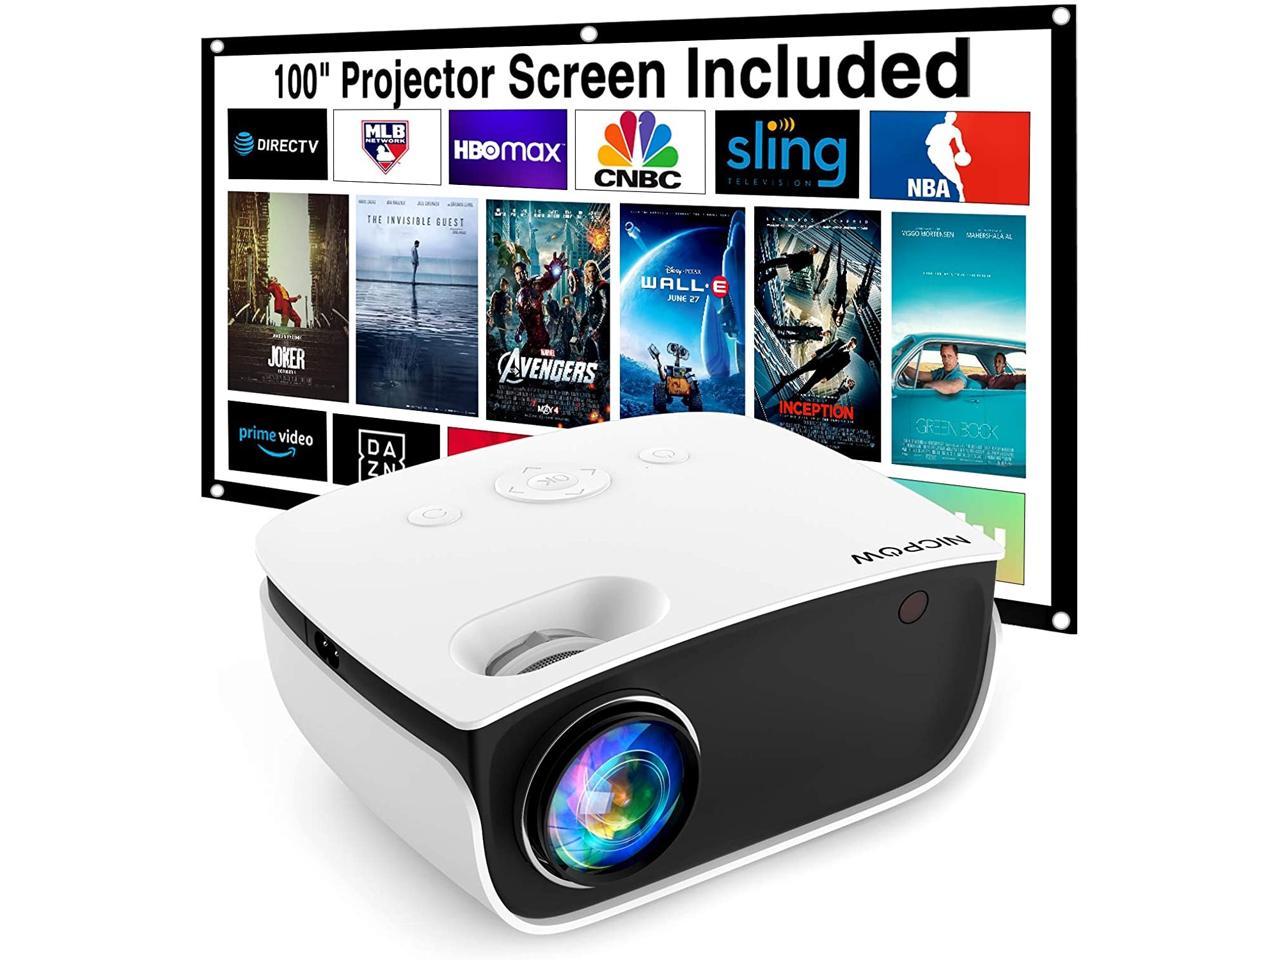 Projector APEMAN Mini Projector 4000 Lumen 720p Native Resolution Portable LED with Dual Built-in Speakers 50000 Hrs Support HDMI/Micro SD/USB Laptop/TV Stick/Phone for Home Movie Time 2019 Model 